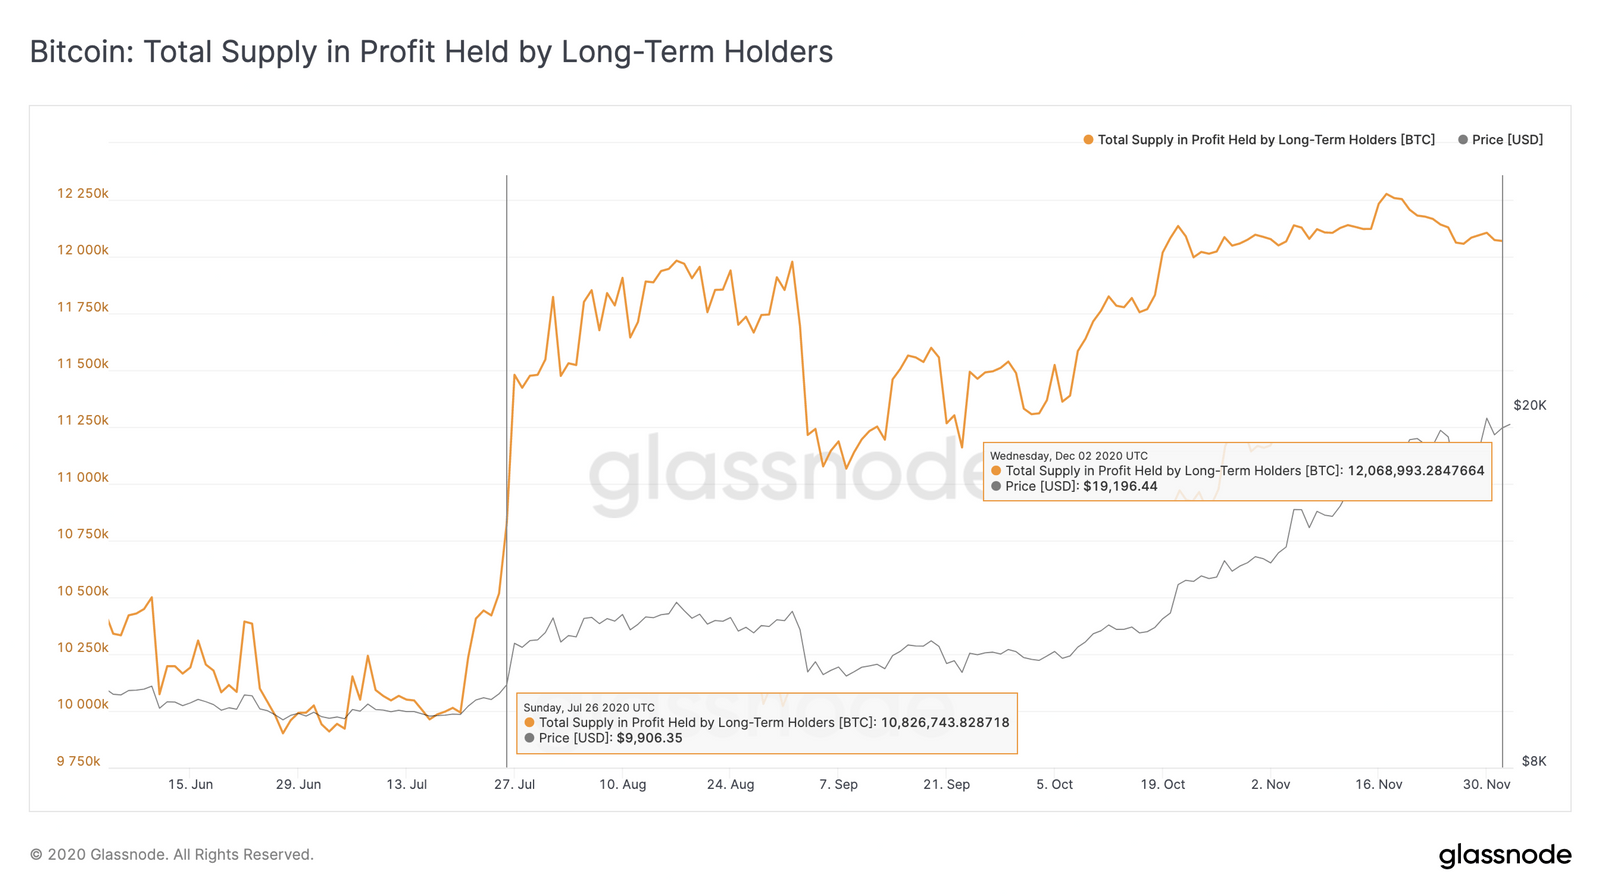 Bitcoin long-term holder supply in profit chart